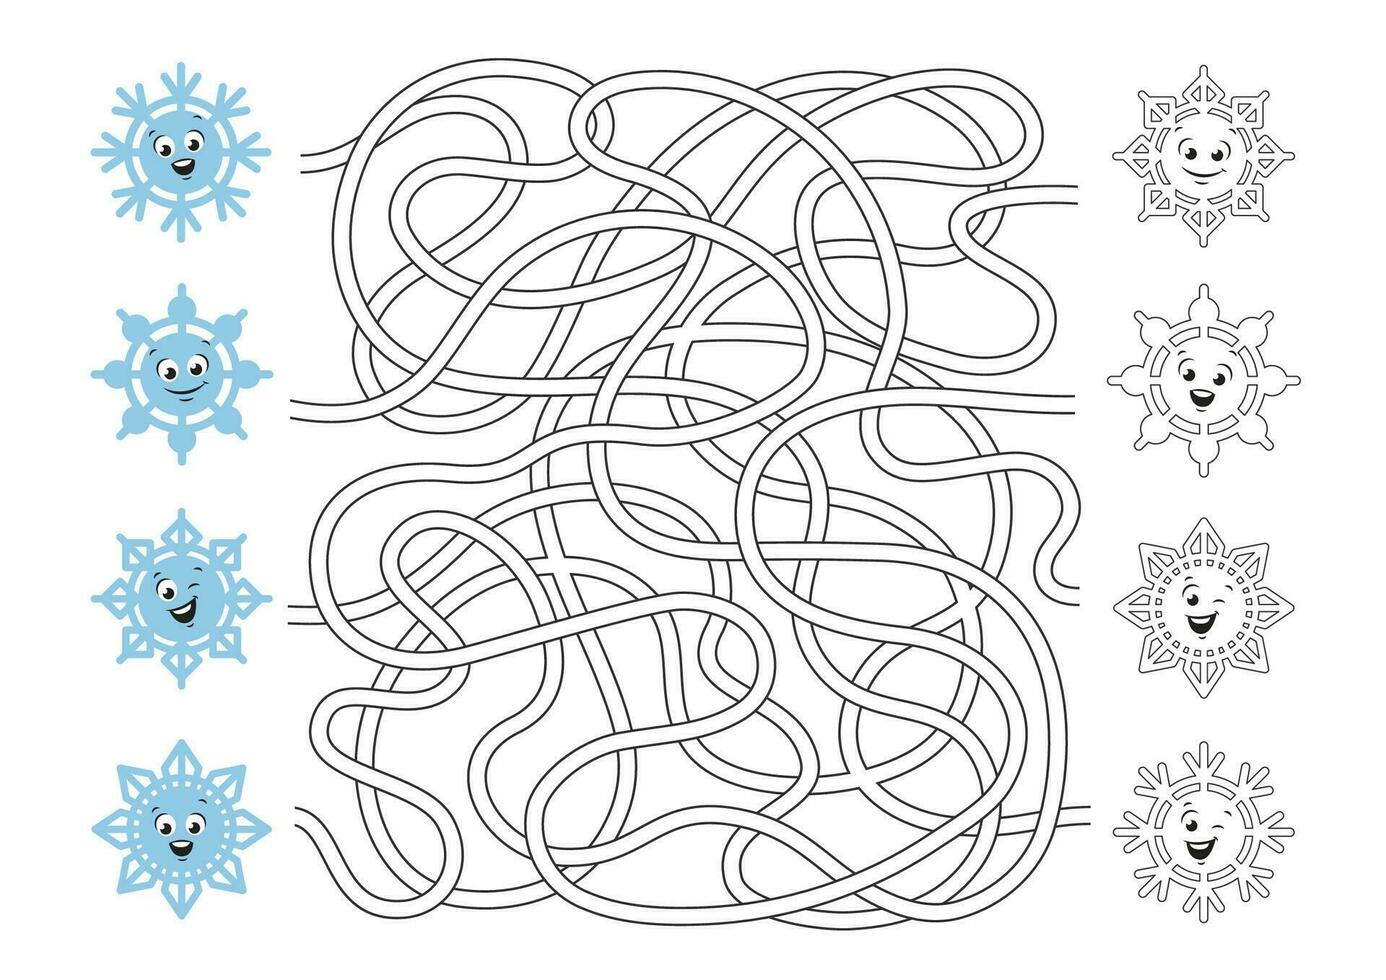 Labyrinth and coloring page  for children. Cute and funny of snowflakes. Winter holiday games. Vector illustration